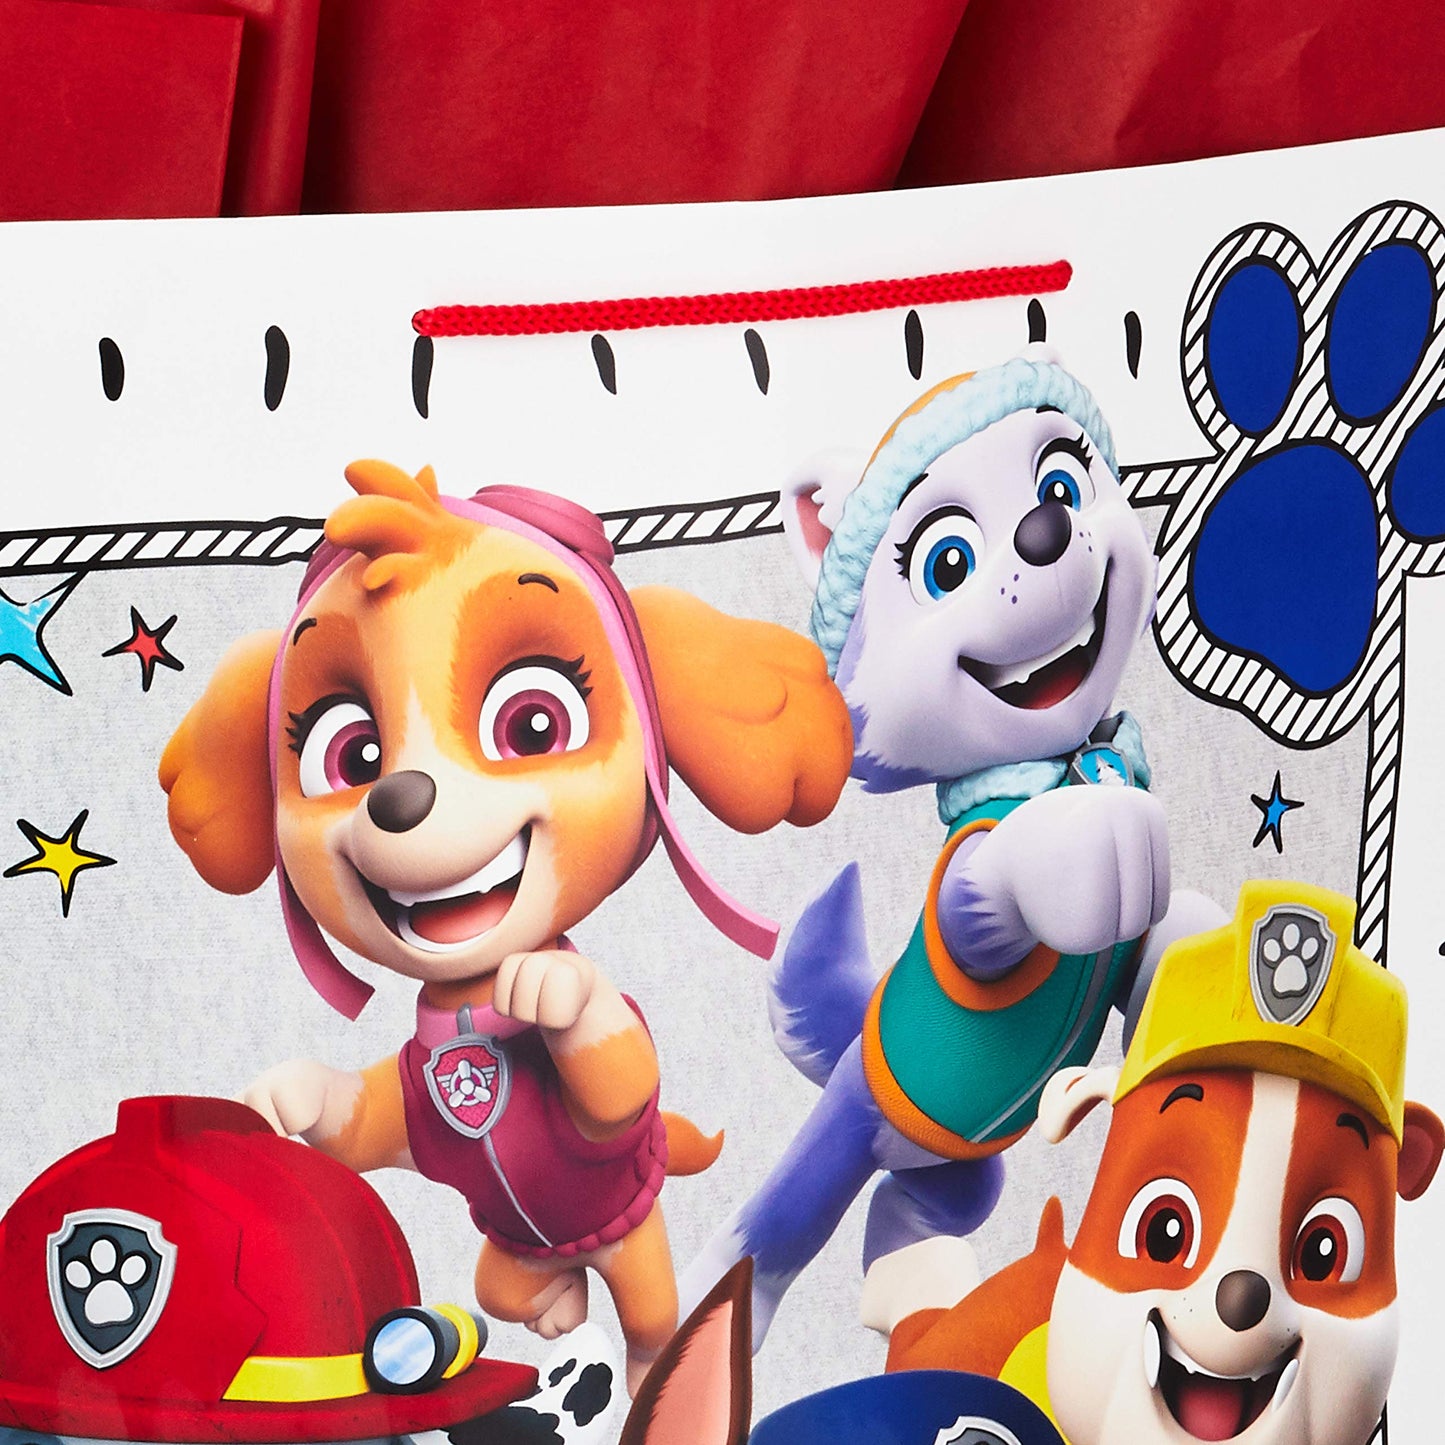 Hallmark 15" Extra Large Paw Patrol Gift Bag with Tissue Paper for Birthdays, Kids Parties, Christmas, Holidays,Red